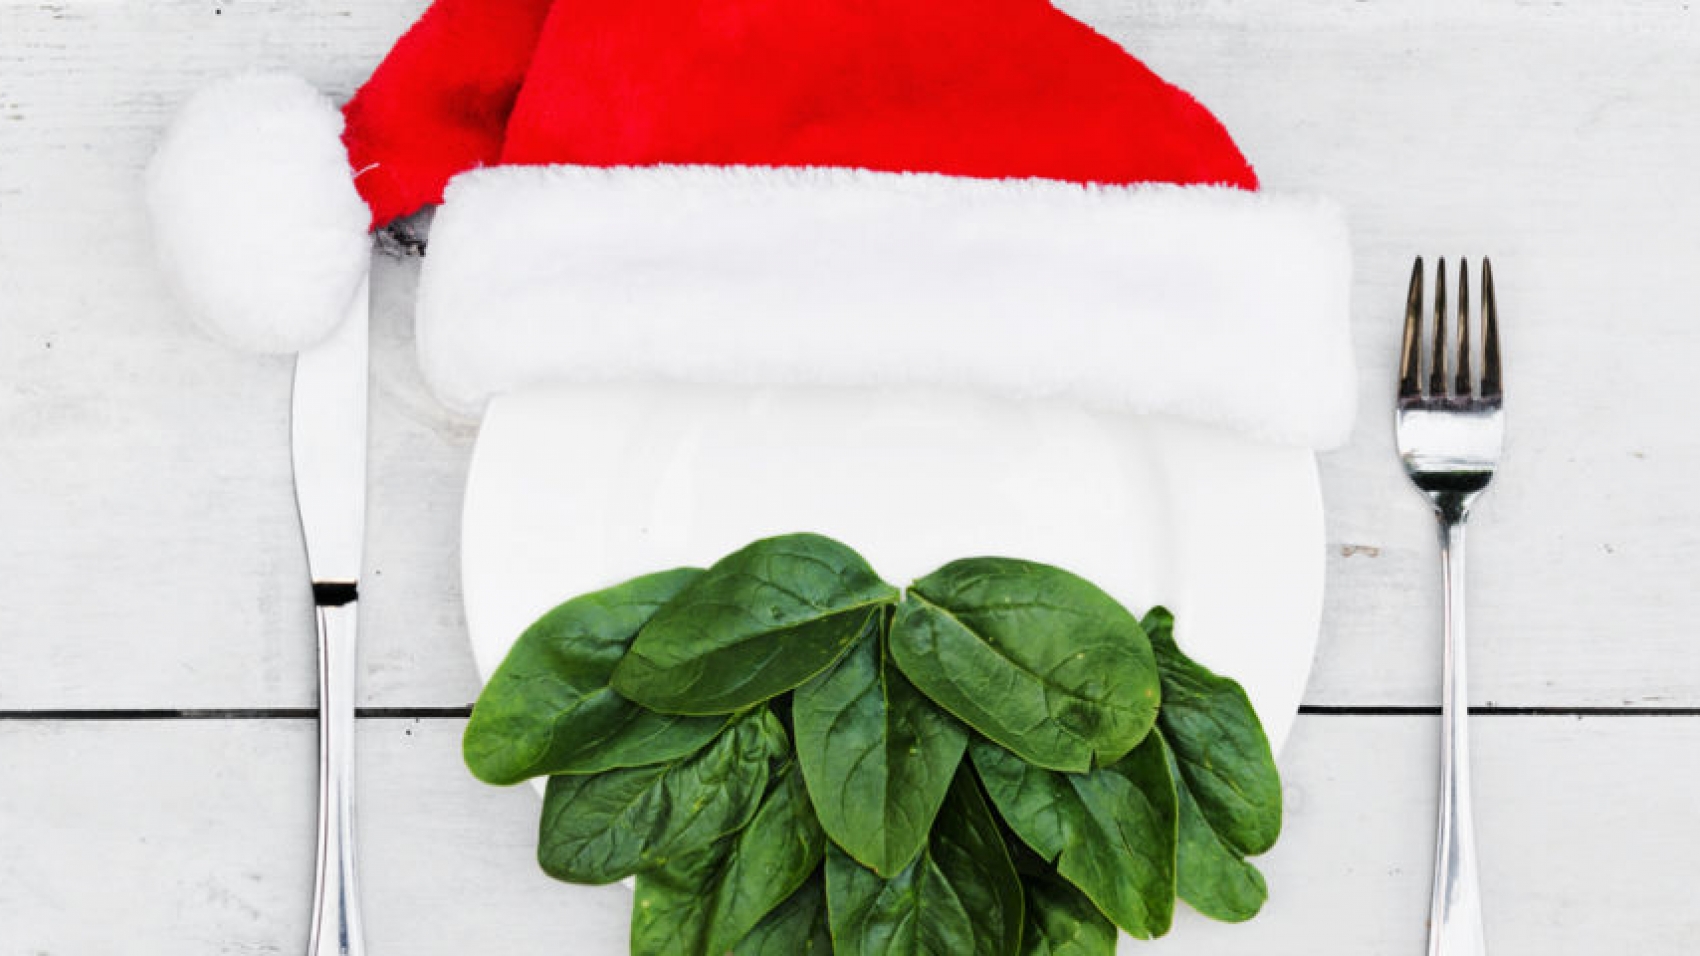 Santa’s beard made out of spinach on a plate